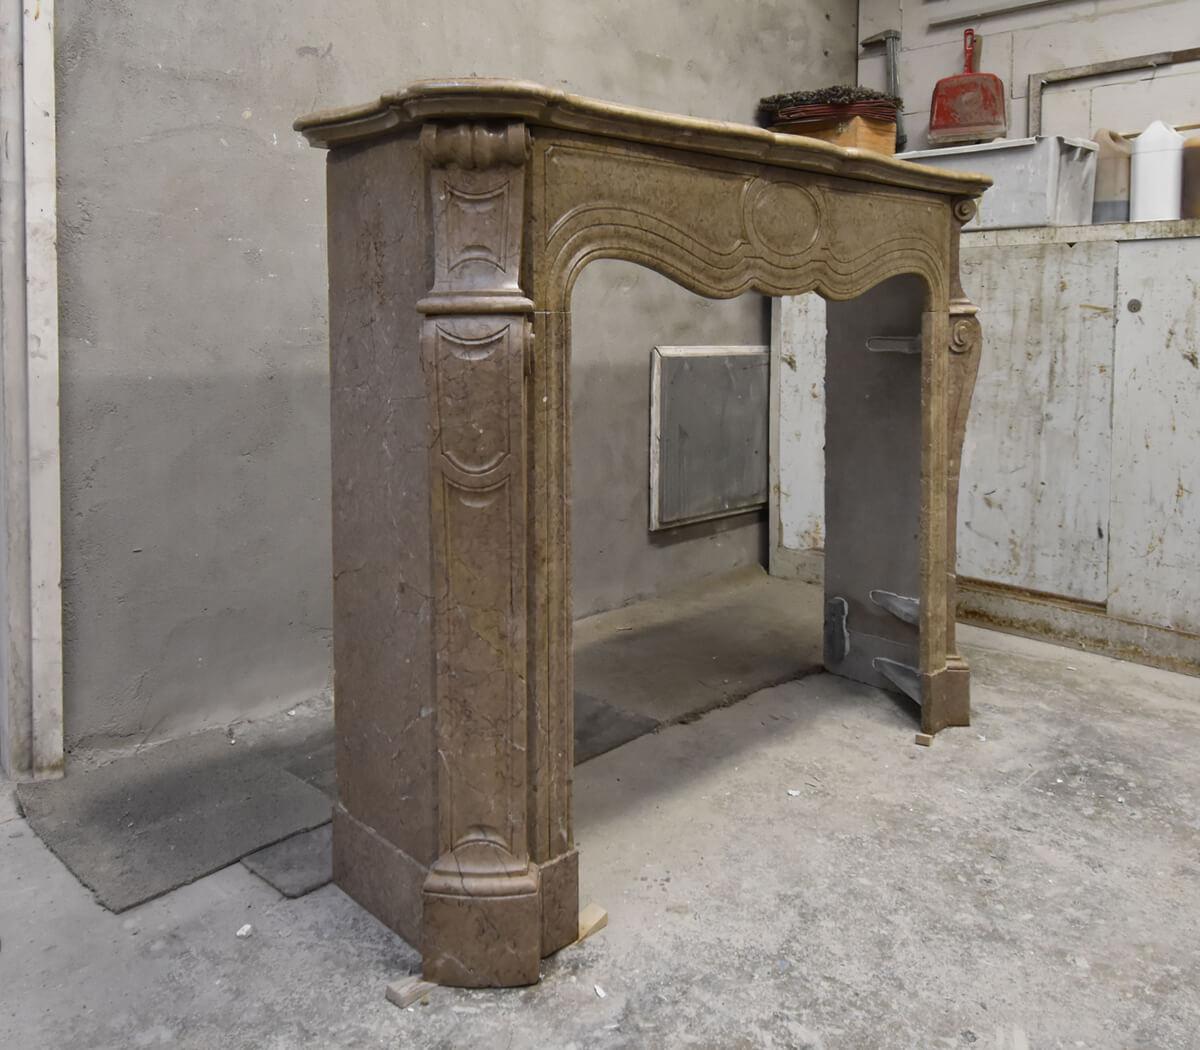 Camel / brown marble Pompadour fireplace mantel with Pied Galbé.
To place in front of the chimney.